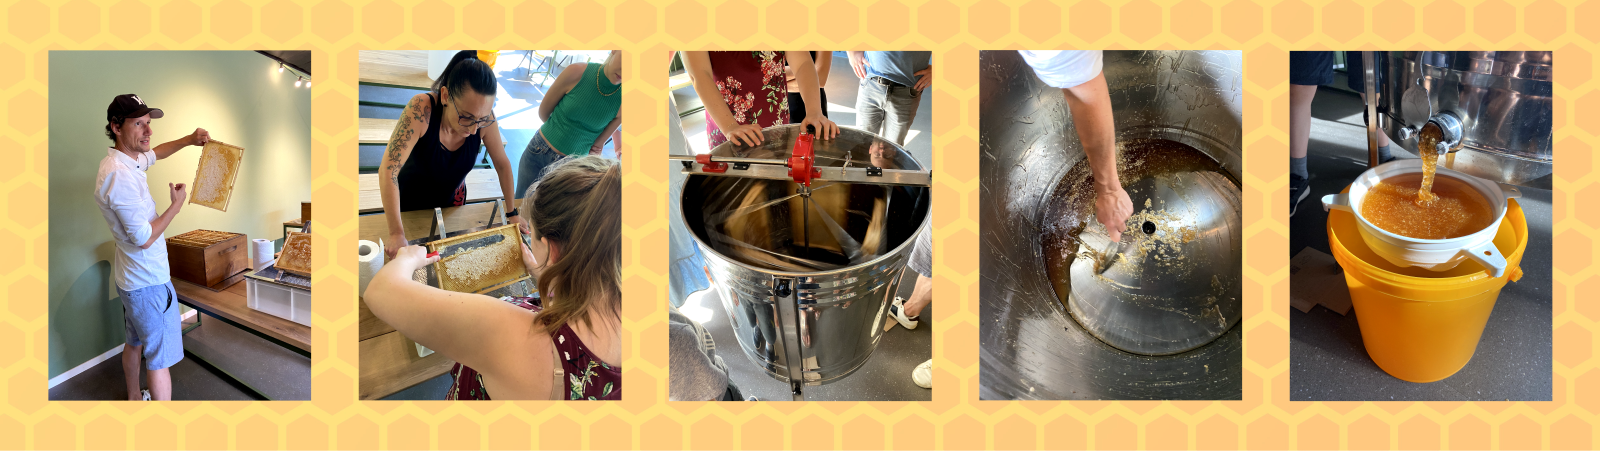 Go for the Gold: Extracting Honey for a Second time at Seibert Media - getting the honey out in the office